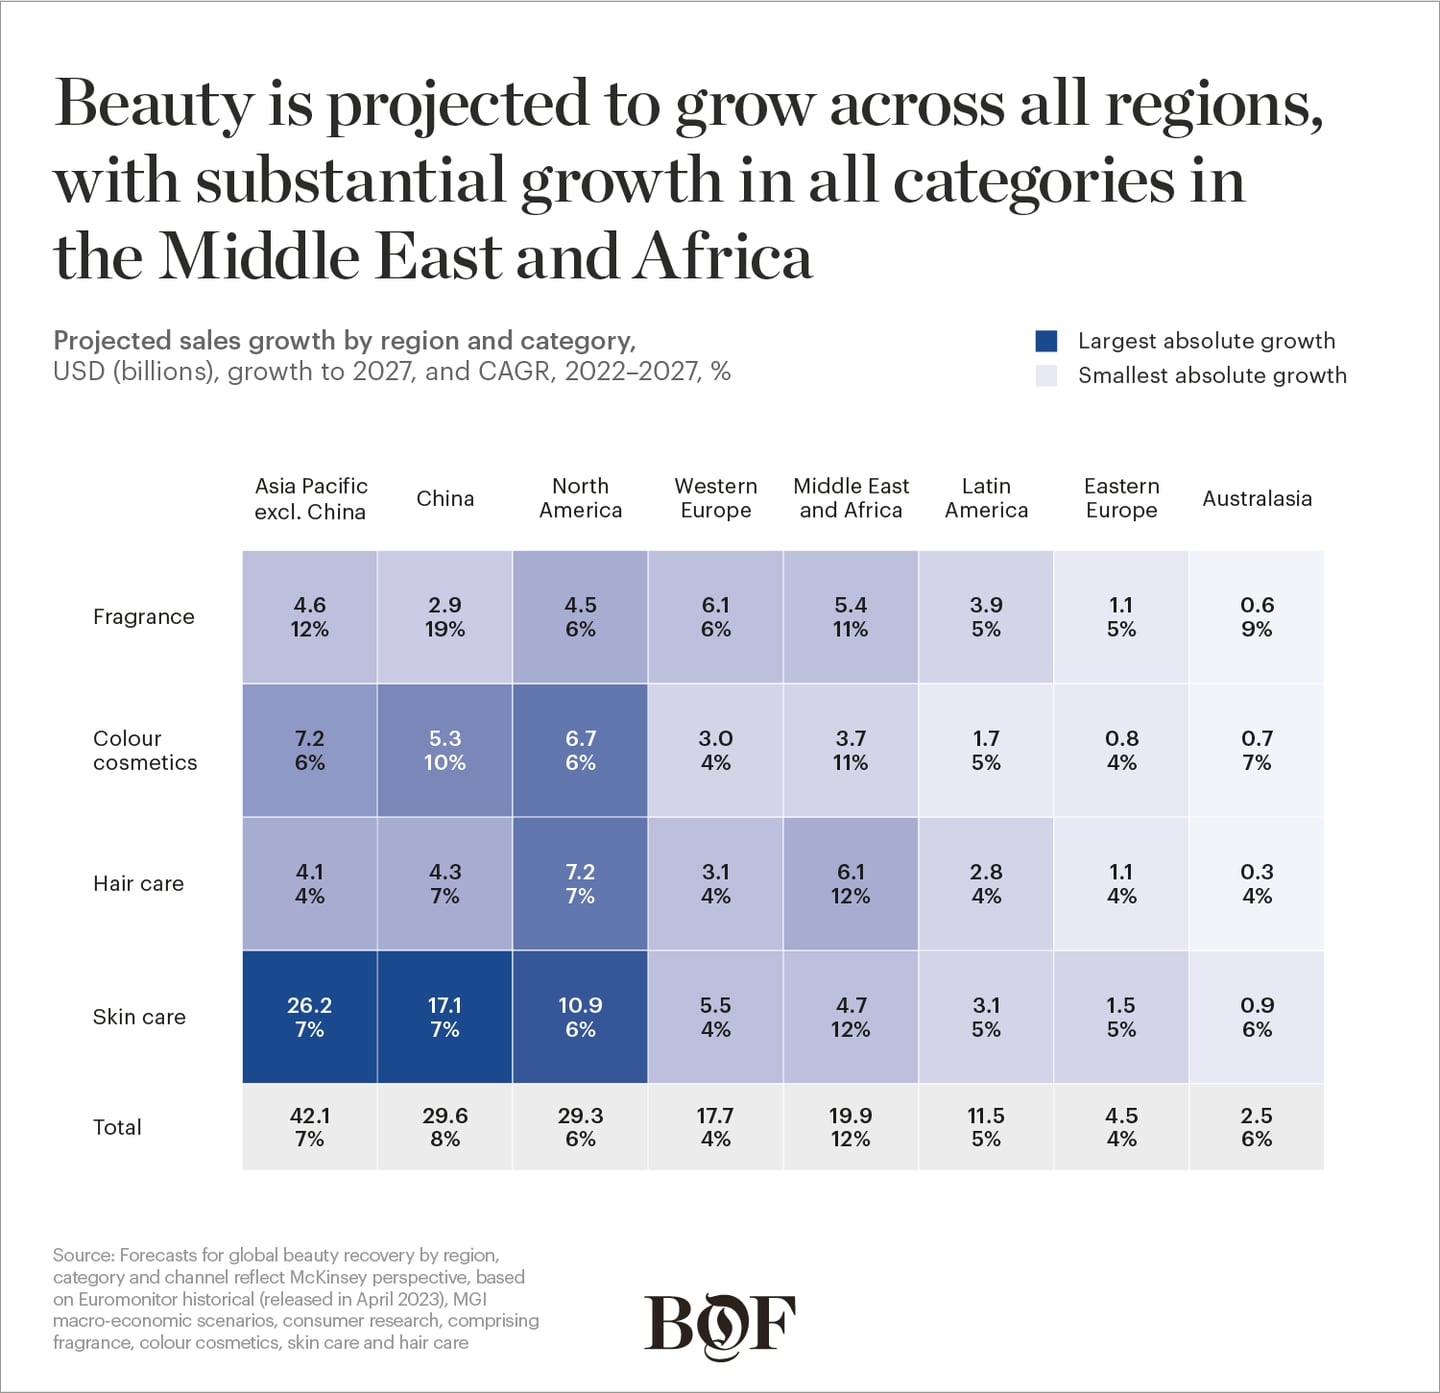 Beauty is projected to grow across all regions, with substantial
growth in all categories in the Middle East and Africa